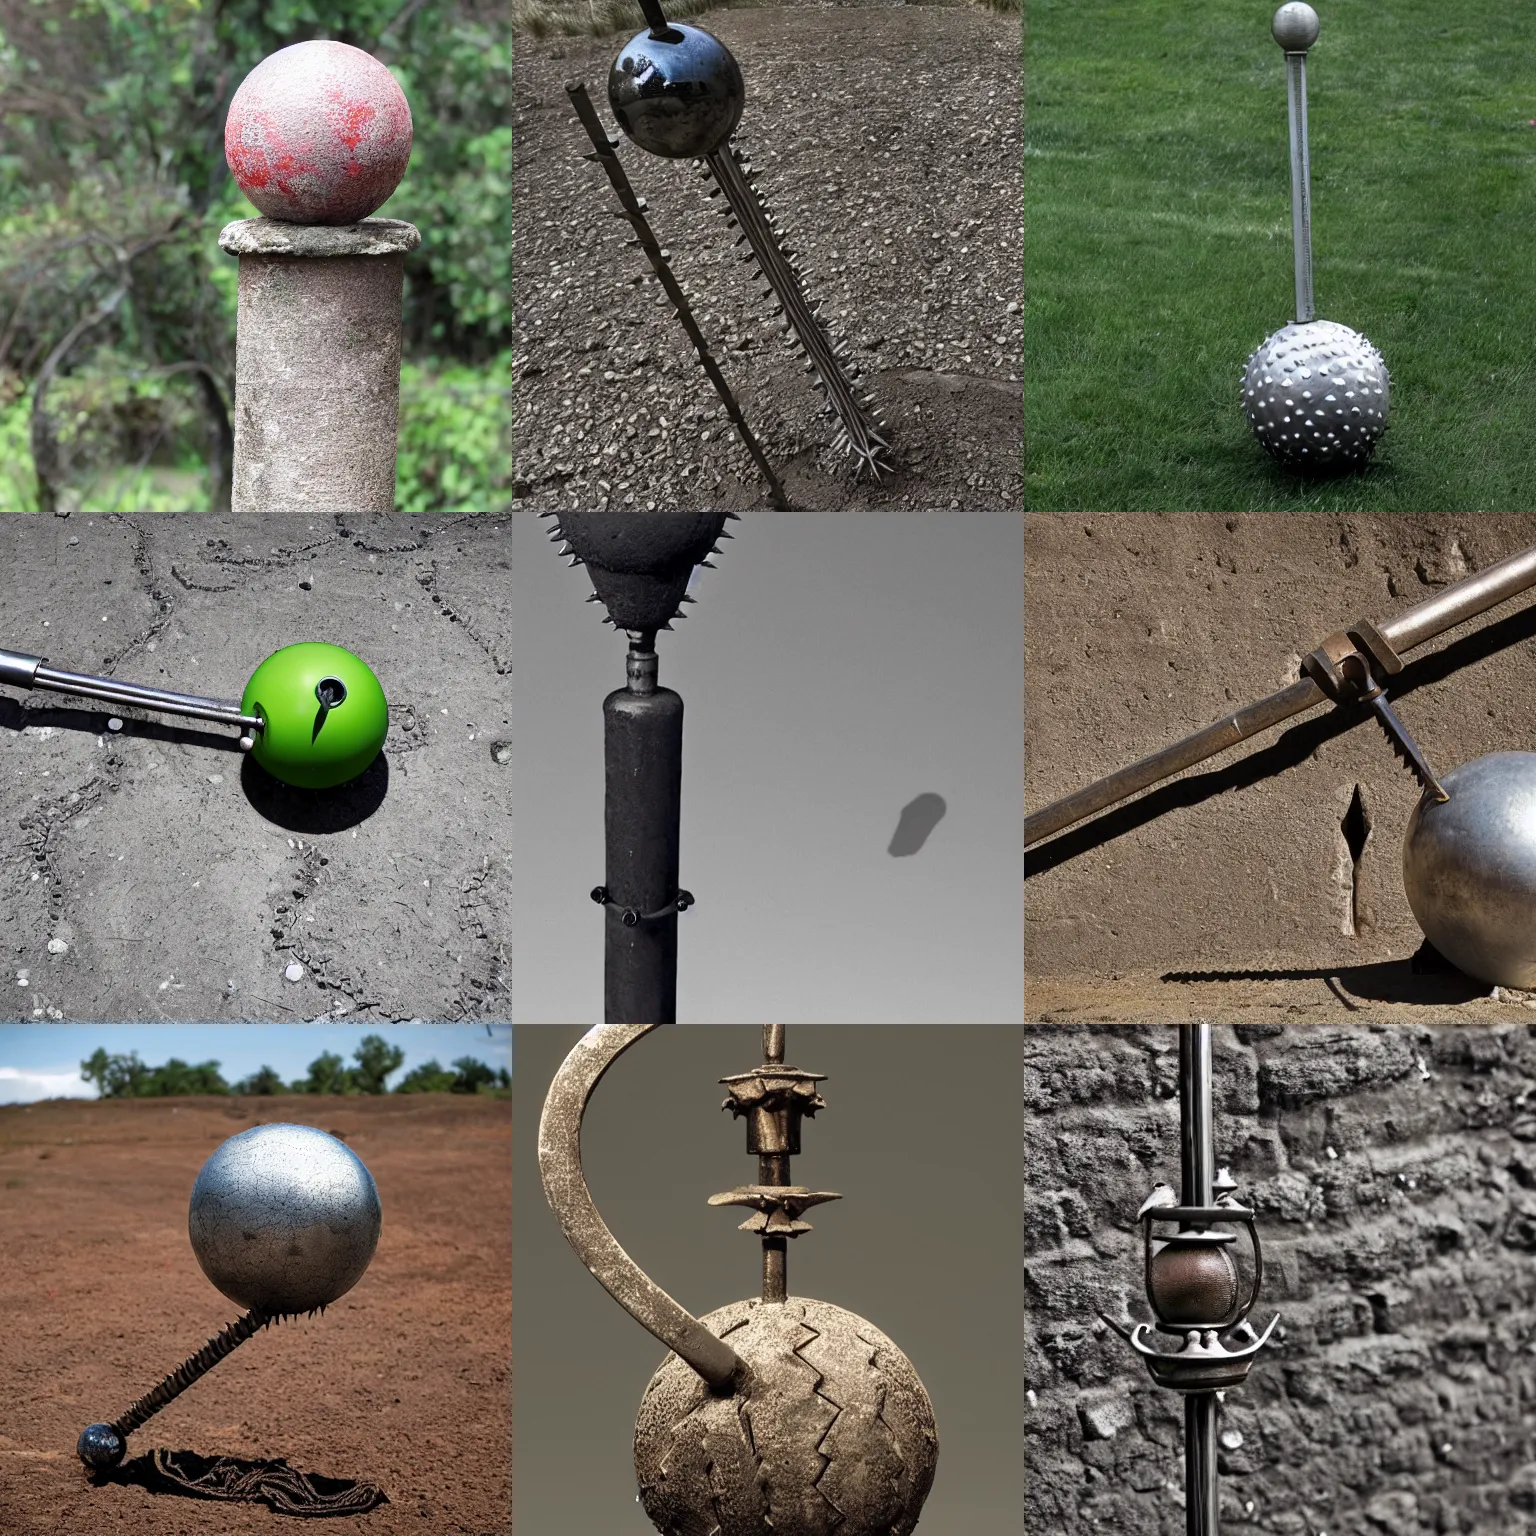 Prompt: A shaft with an attached iron ball adorned with spikes